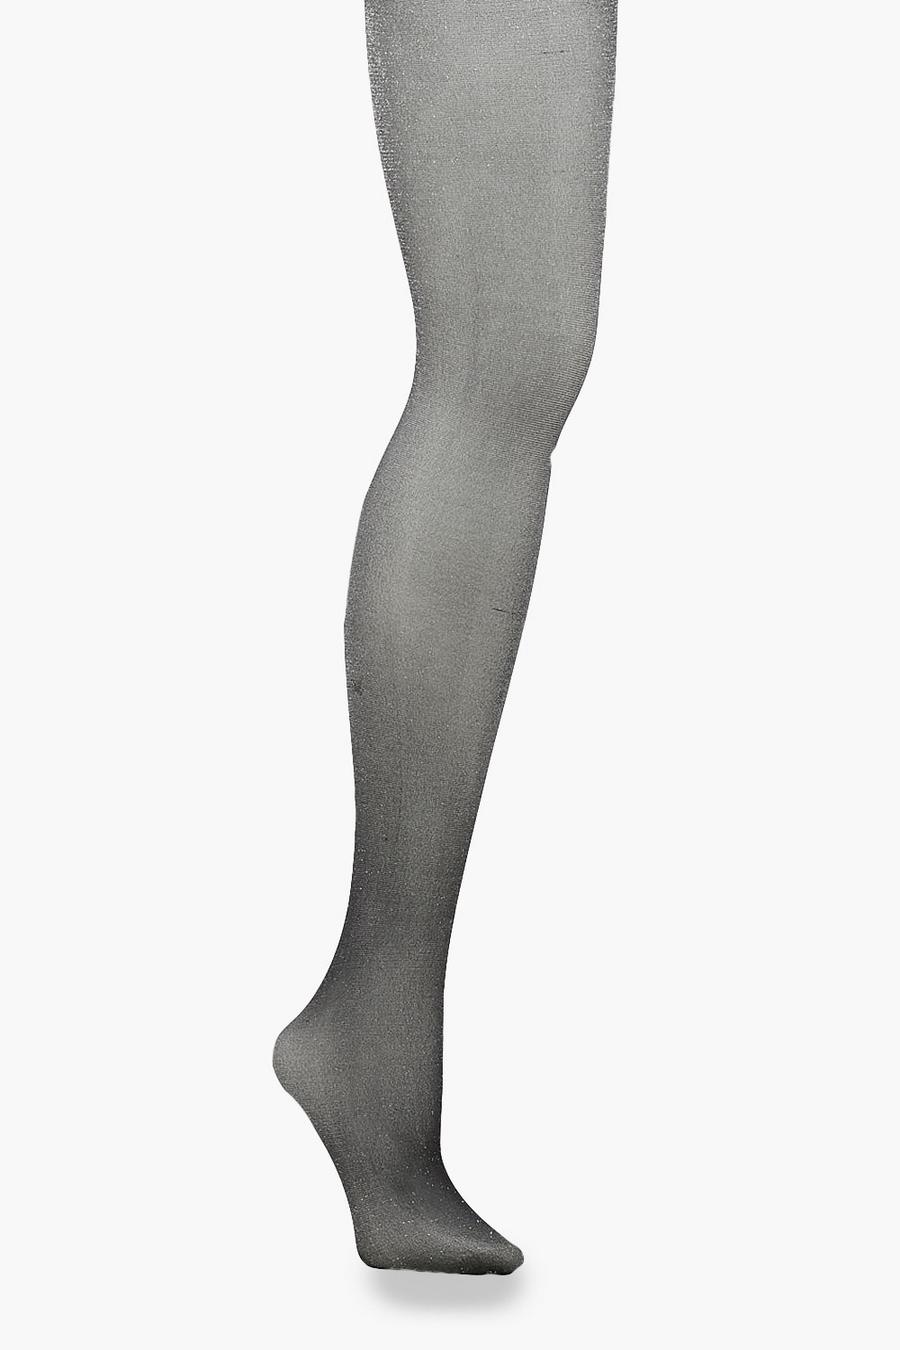 Silver Shimmer Metallic Tights image number 1